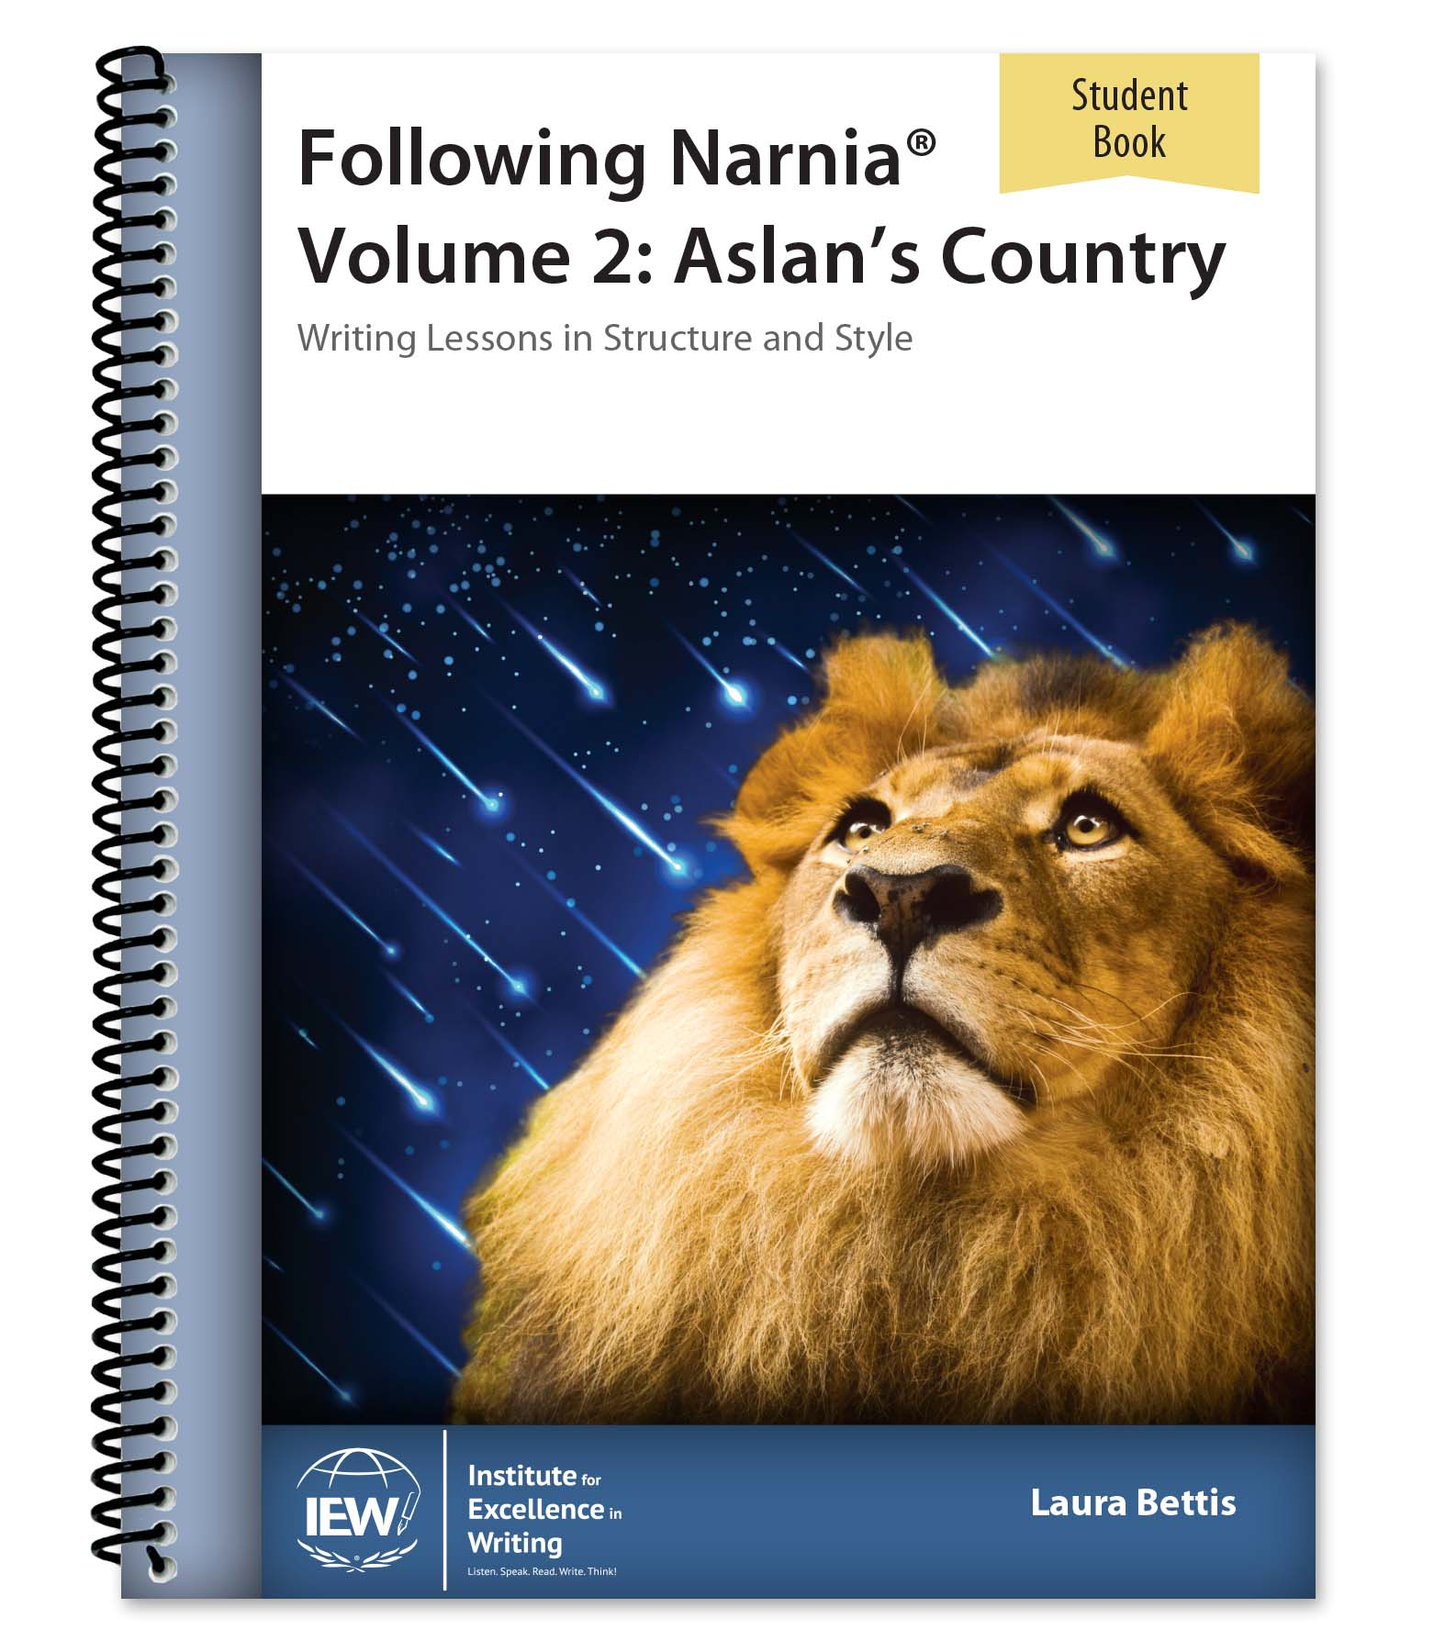 Following Narina Volume 2: Aslan's Country. Themed Based Writing Lessons